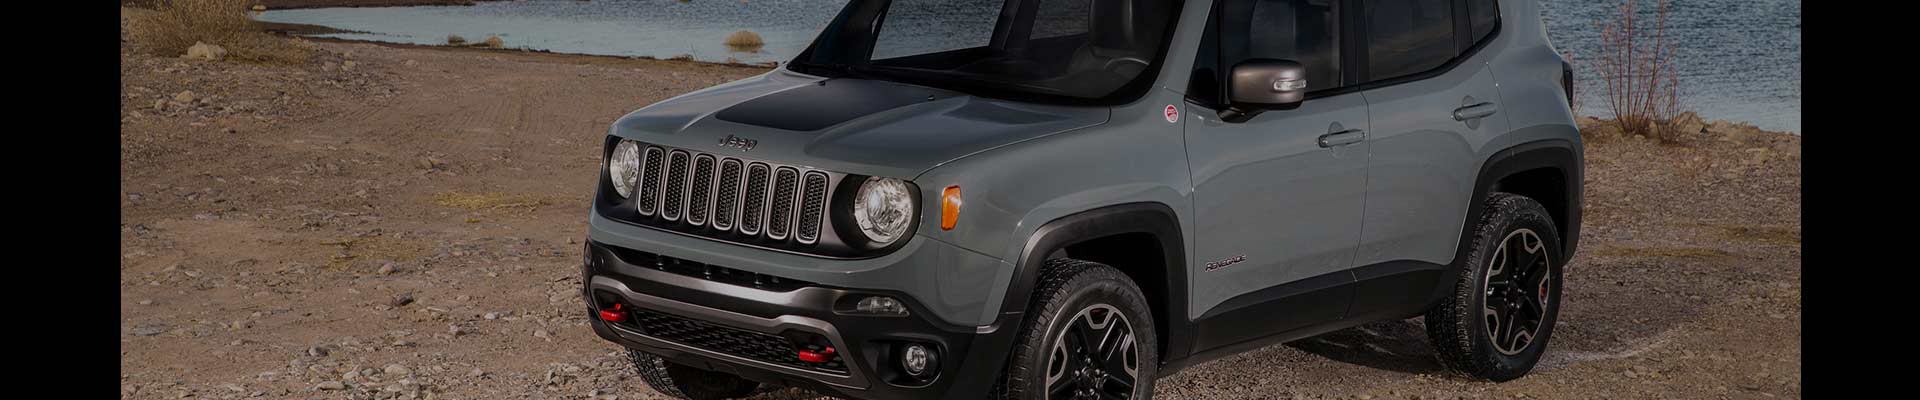 Shop Replacement and OEM 2017 Jeep Renegade Parts with Discounted Price on the Net